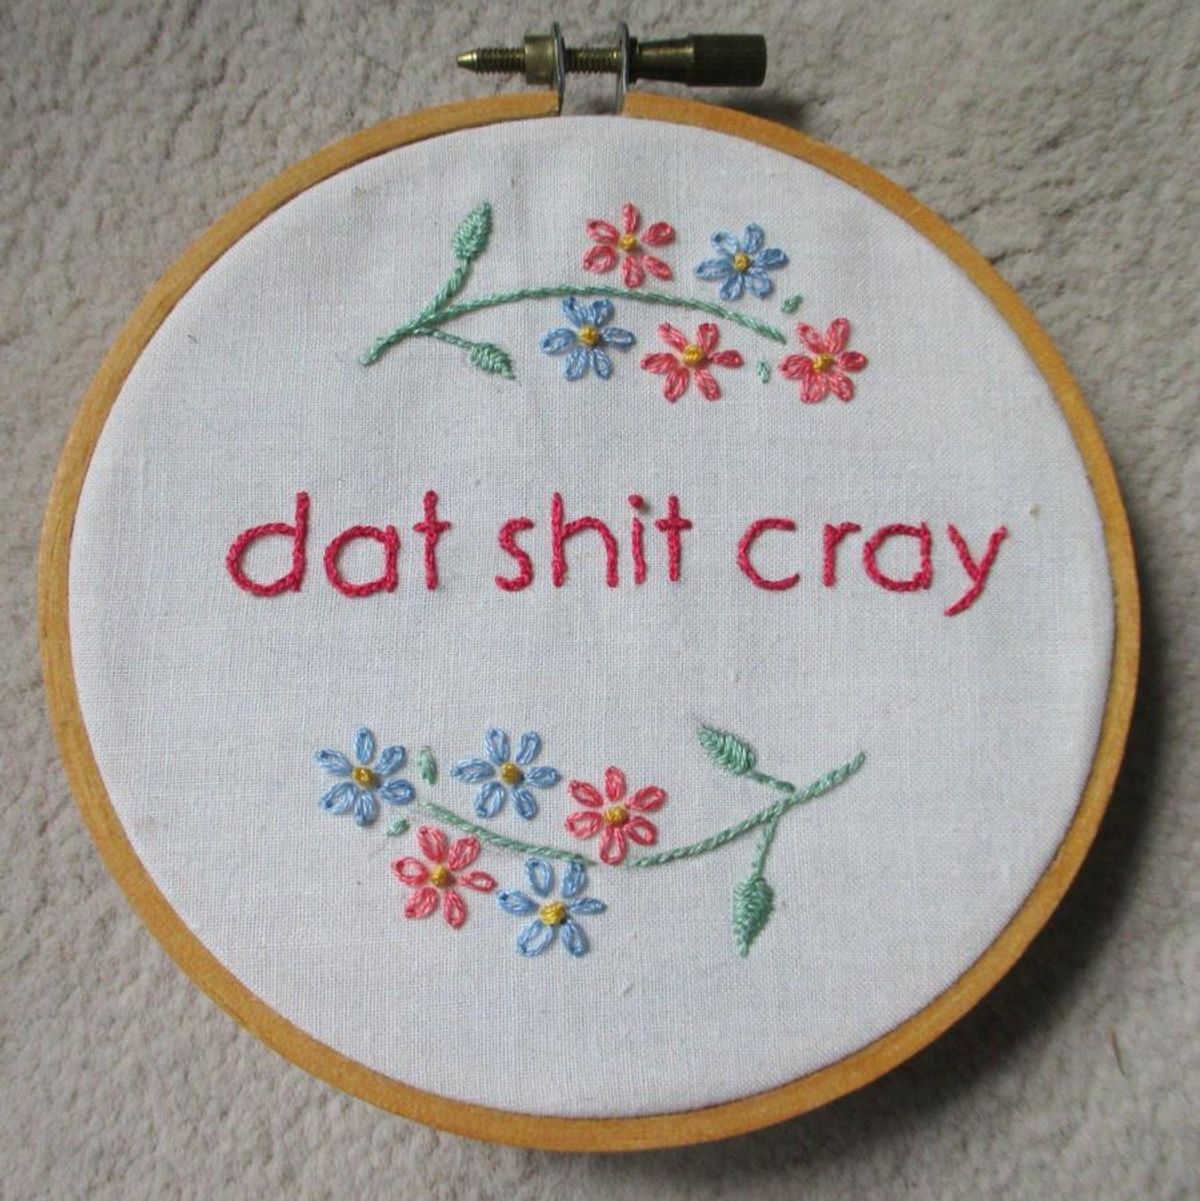 10 Rap Lyric Embroideries That Everyone Needs to See